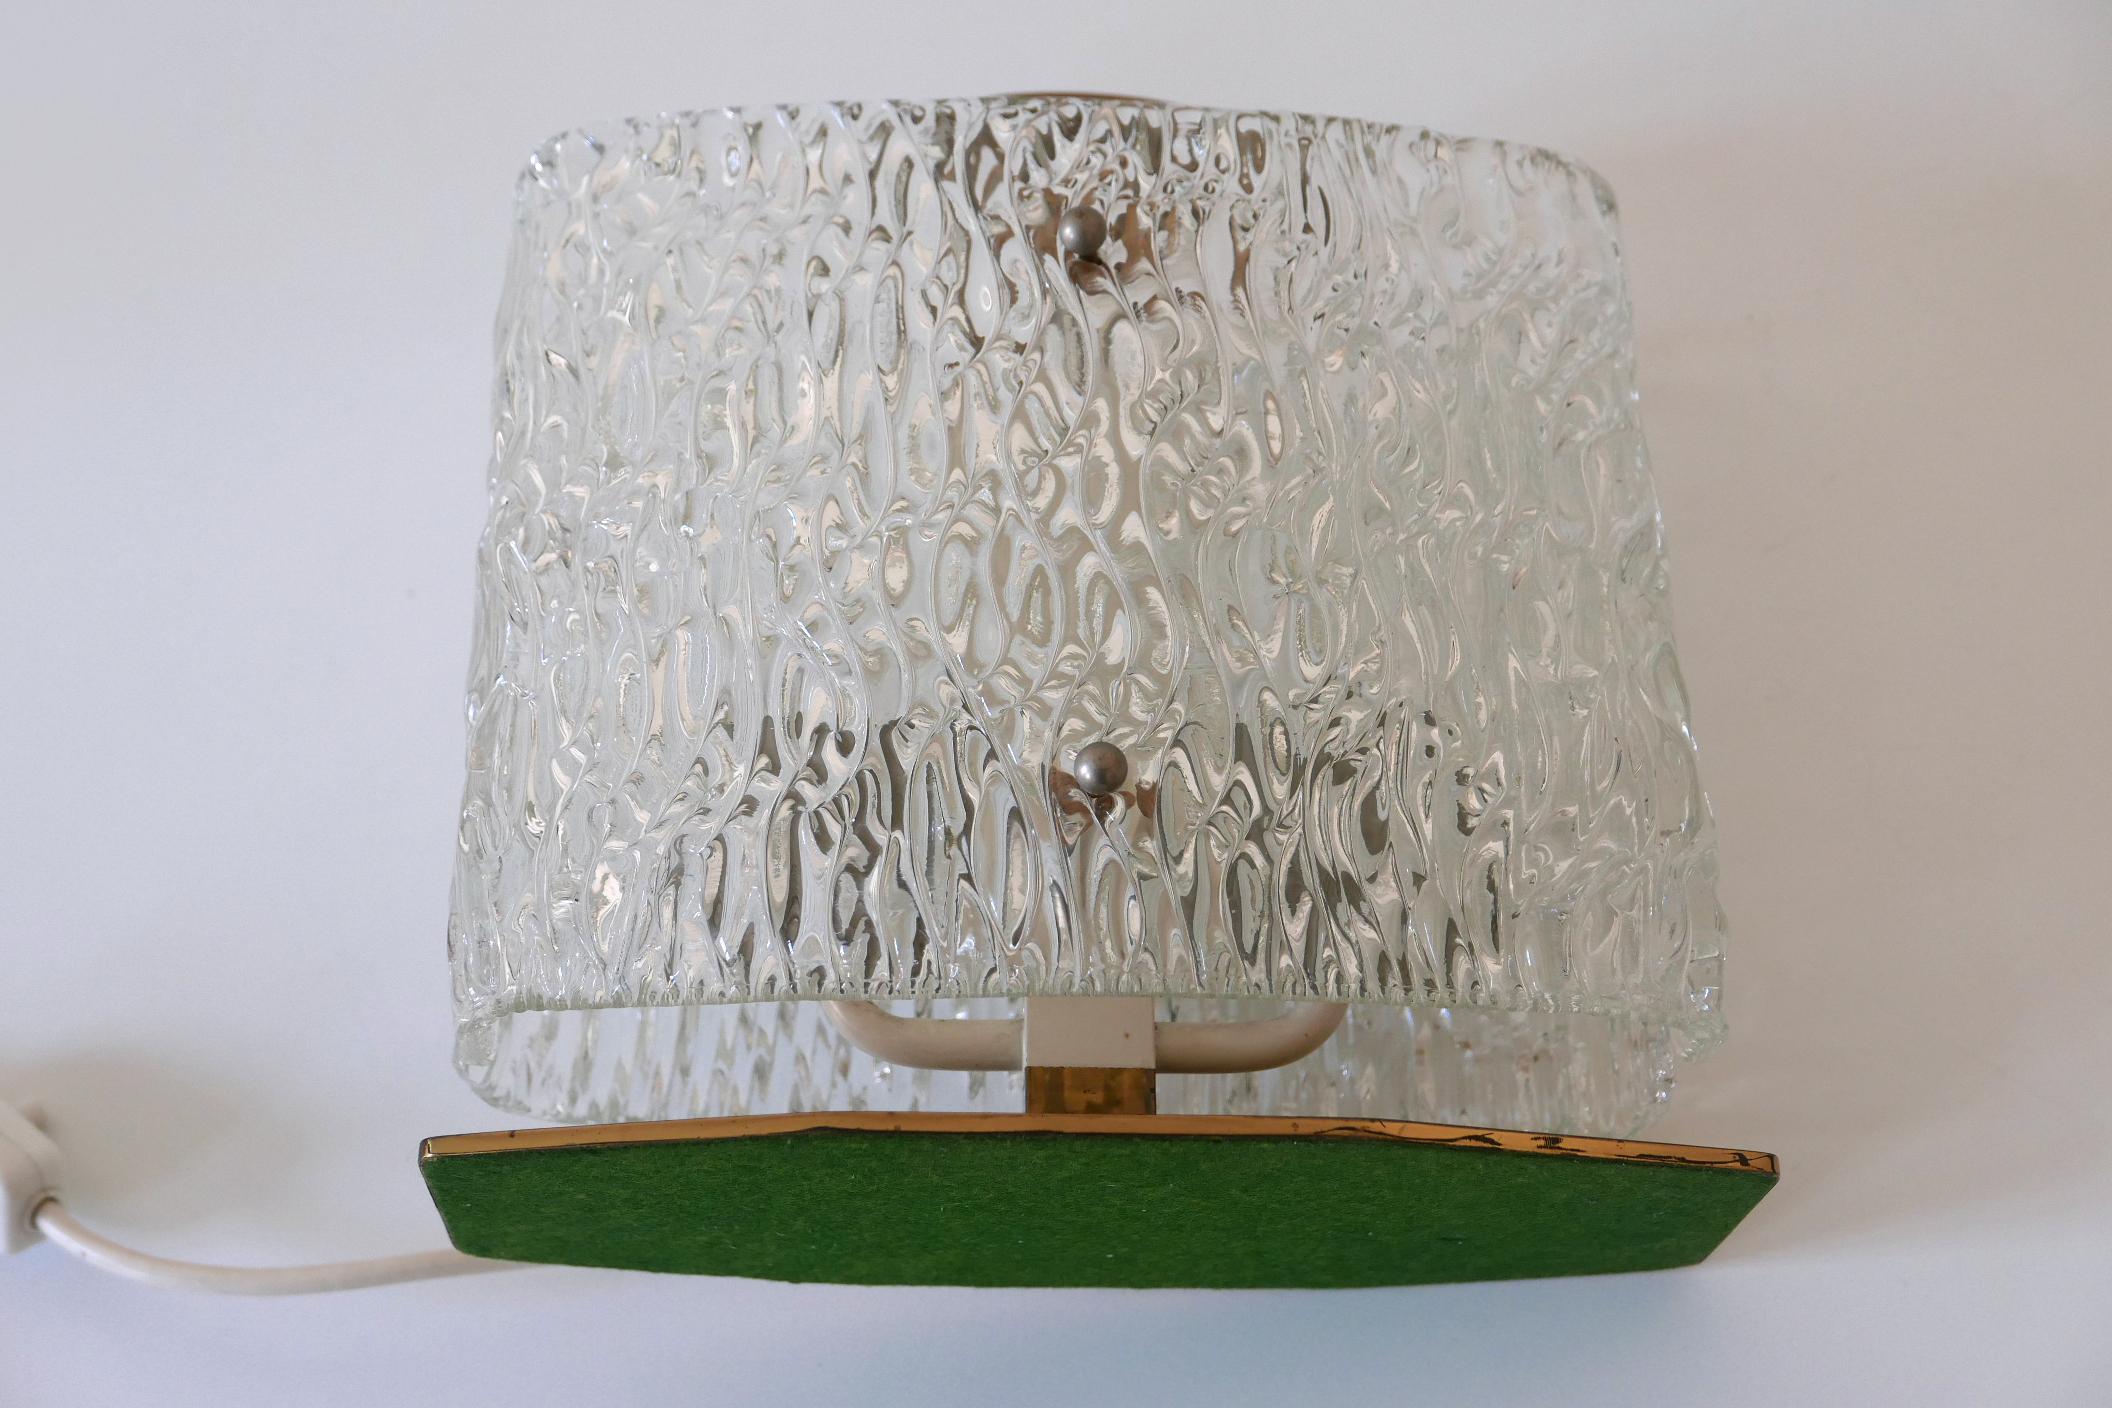 Exceptional Mid-Century Modern Table Lamp with Ice Glass Shade, 1950s, Italy For Sale 13